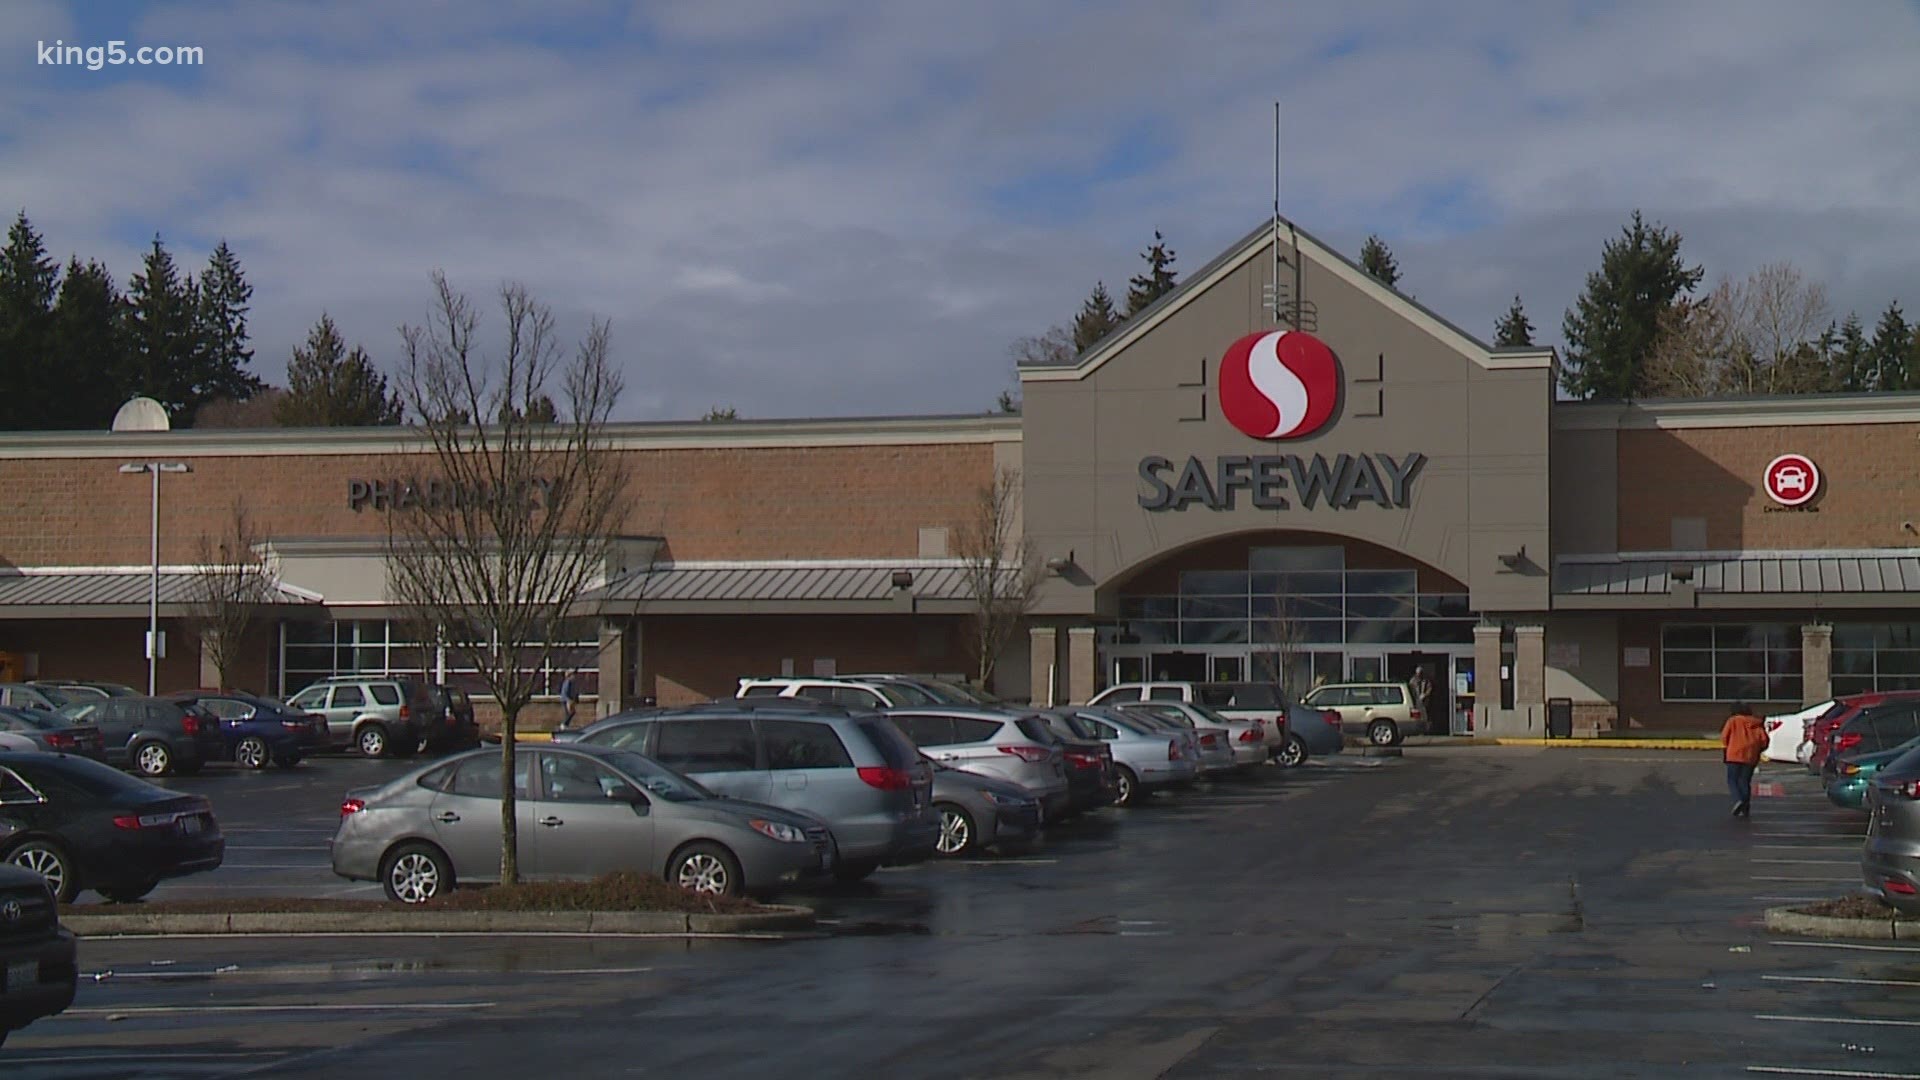 The city of Burien now requires large grocery stores to pay an additional five dollars per hour in hazard pay to all employees.